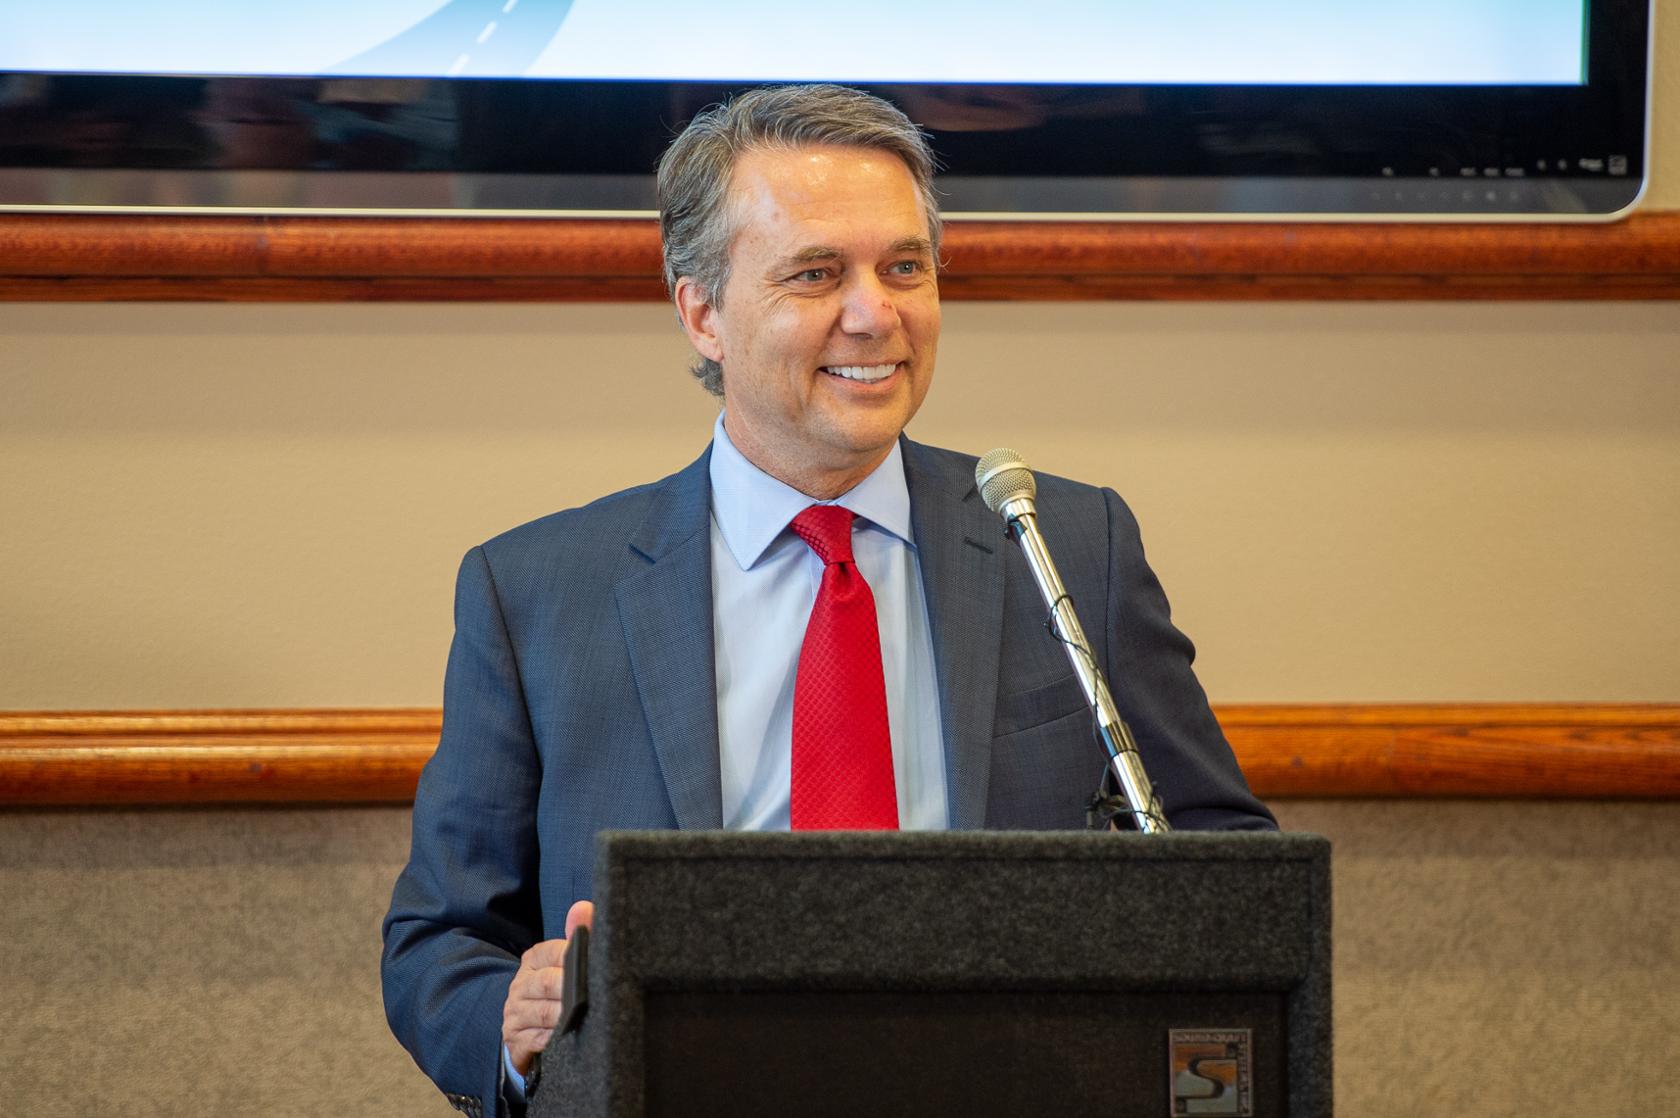 Governor Jeff Colyer